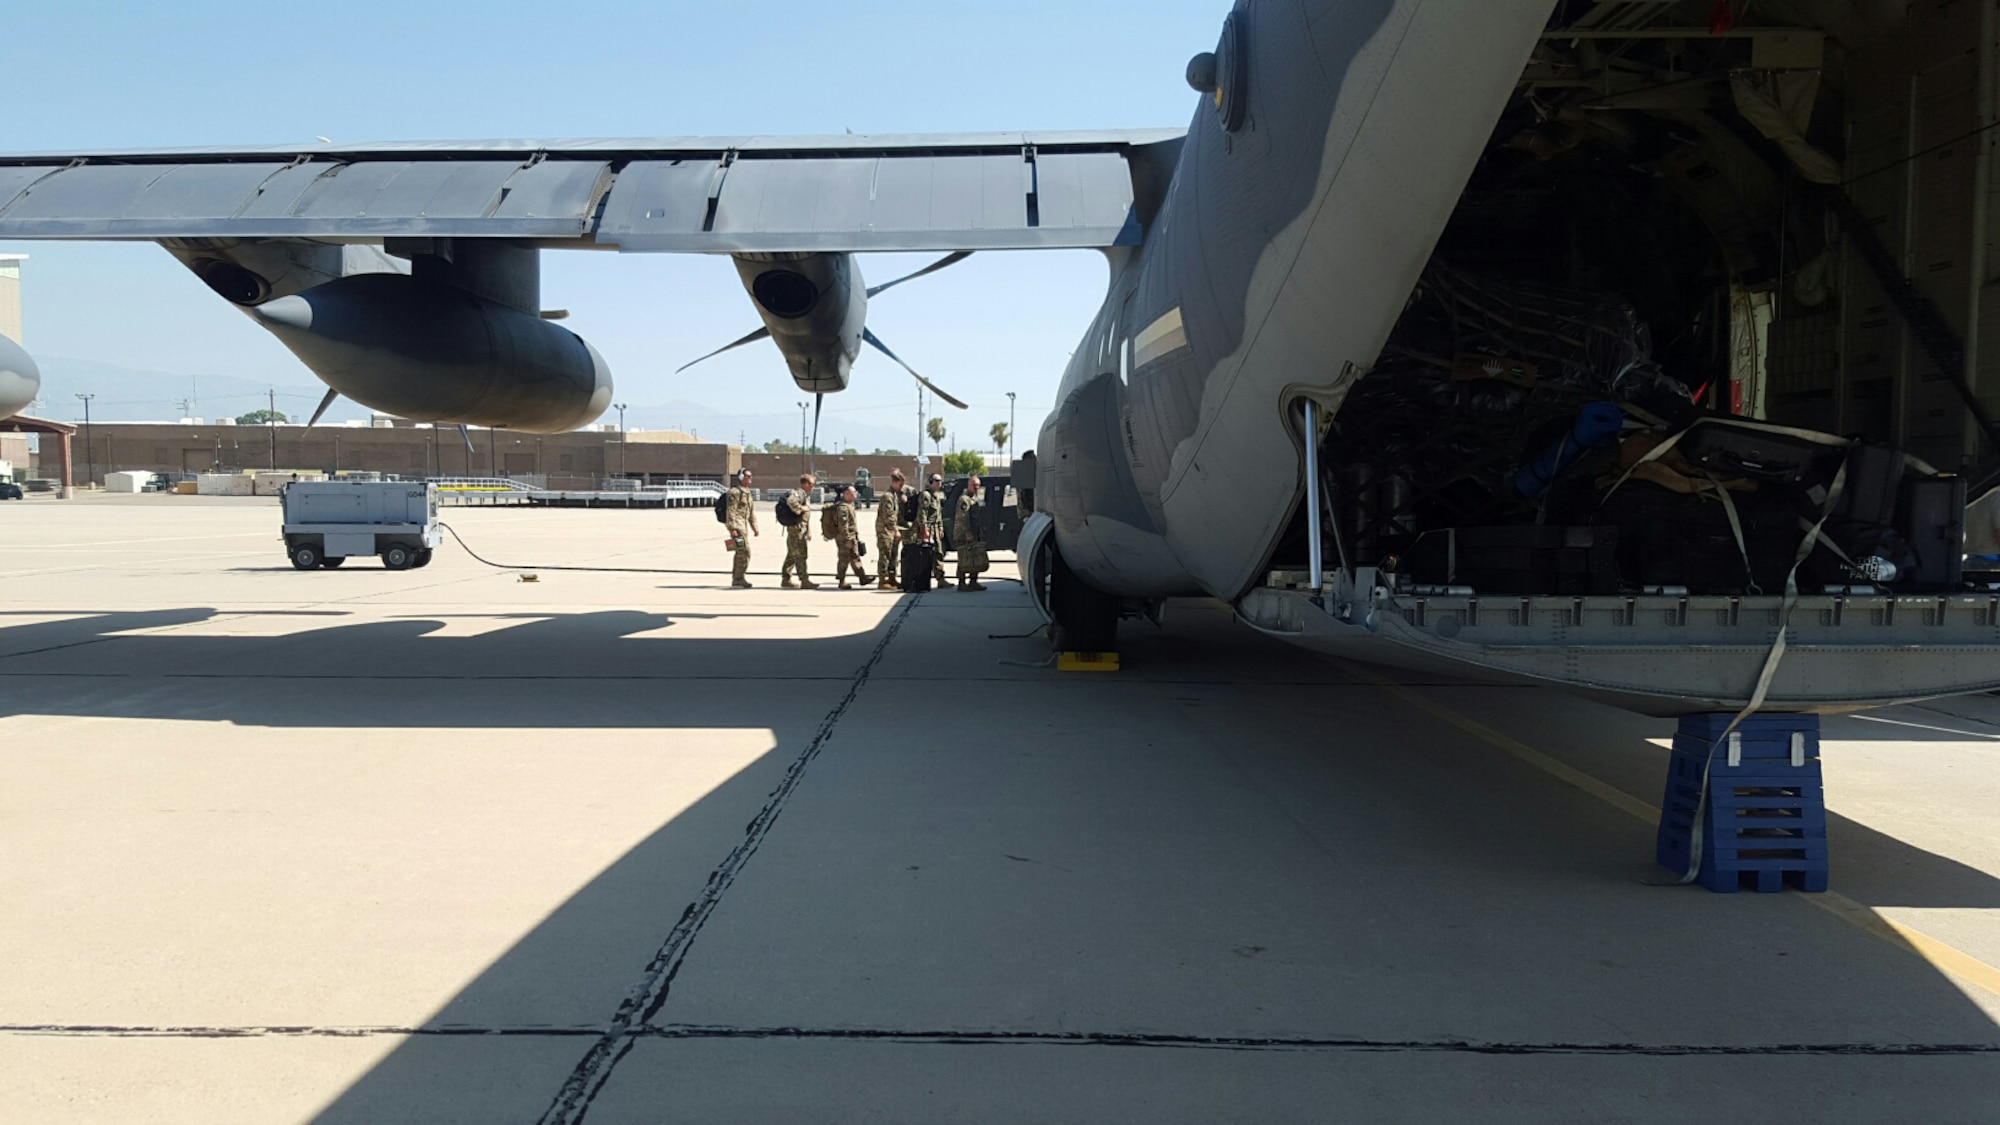 Davis-Monthan Air Force Base Airmen deployed Aug. 29, 2017, to southeast Texas, for Hurricane Harvey rescue efforts.